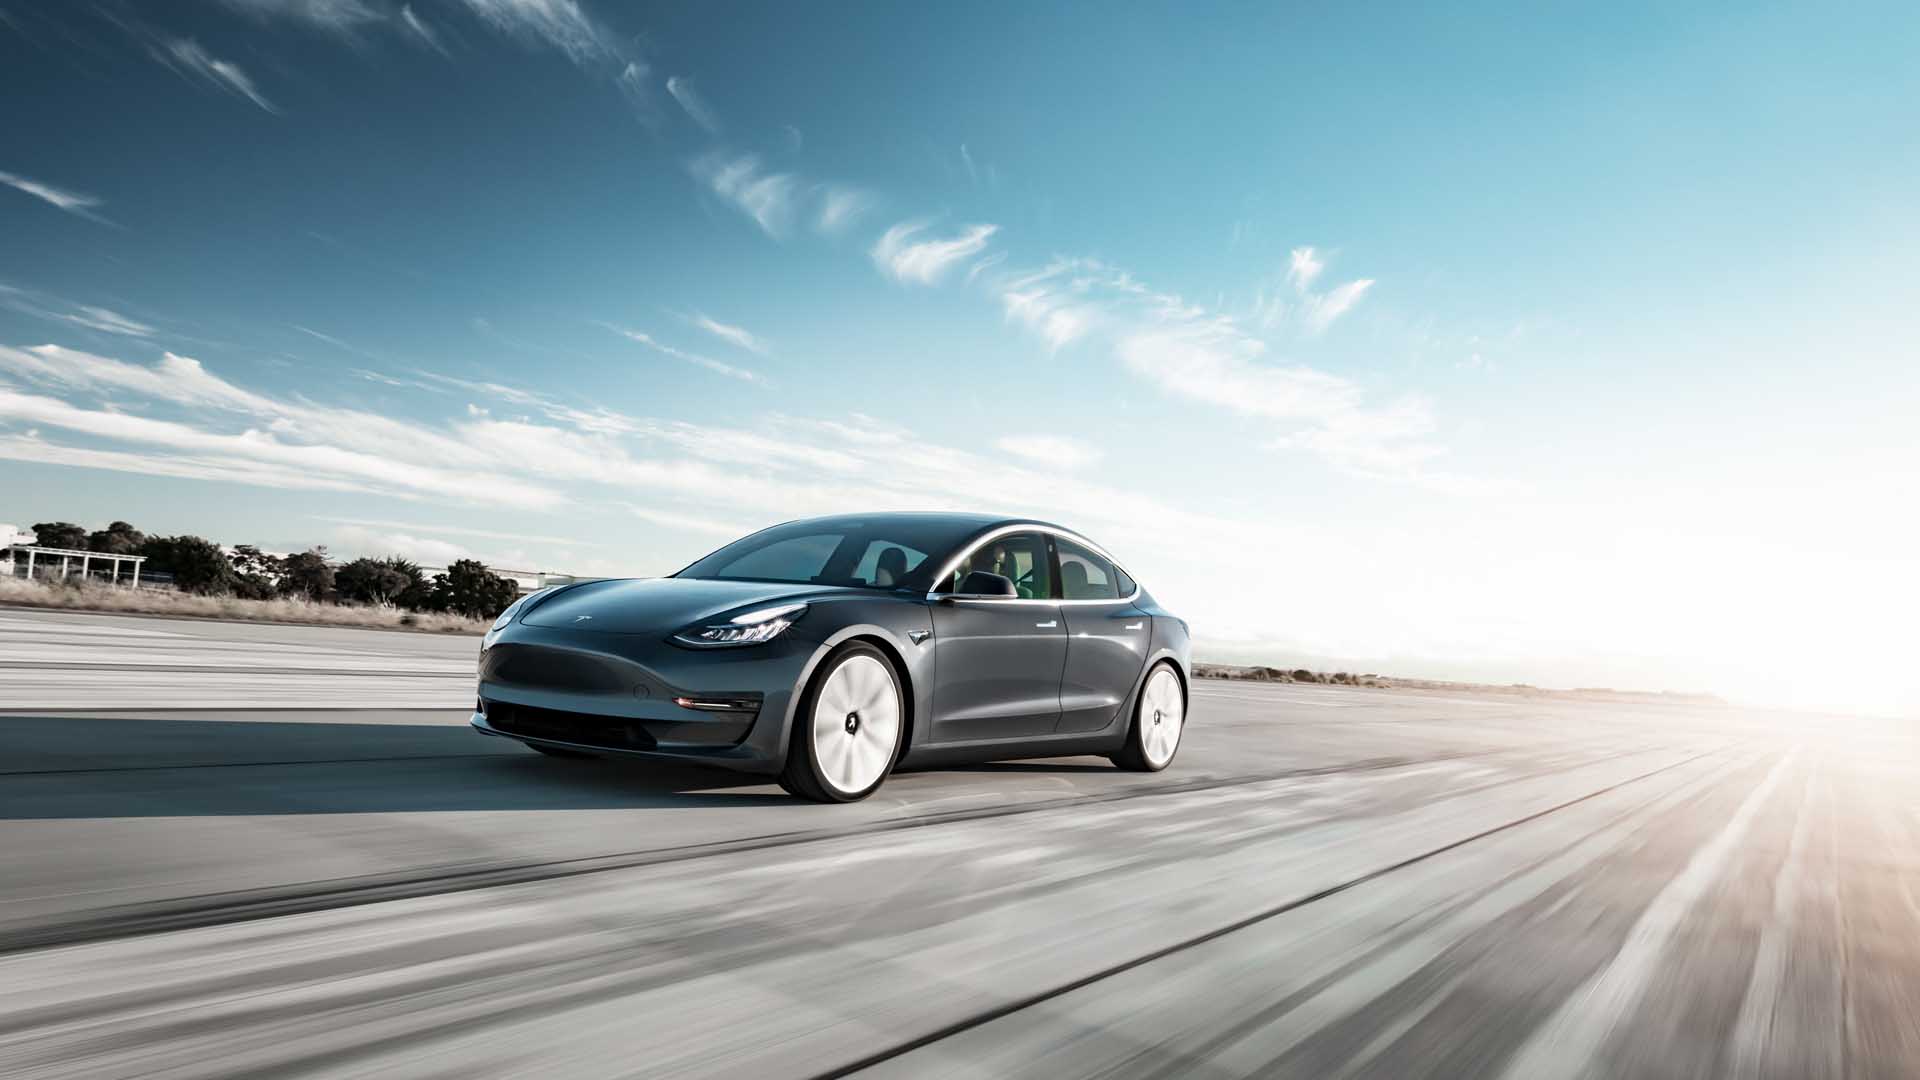 Tesla tops all other EVs in Made in America indexTesla tops all other EVs in Made in America index